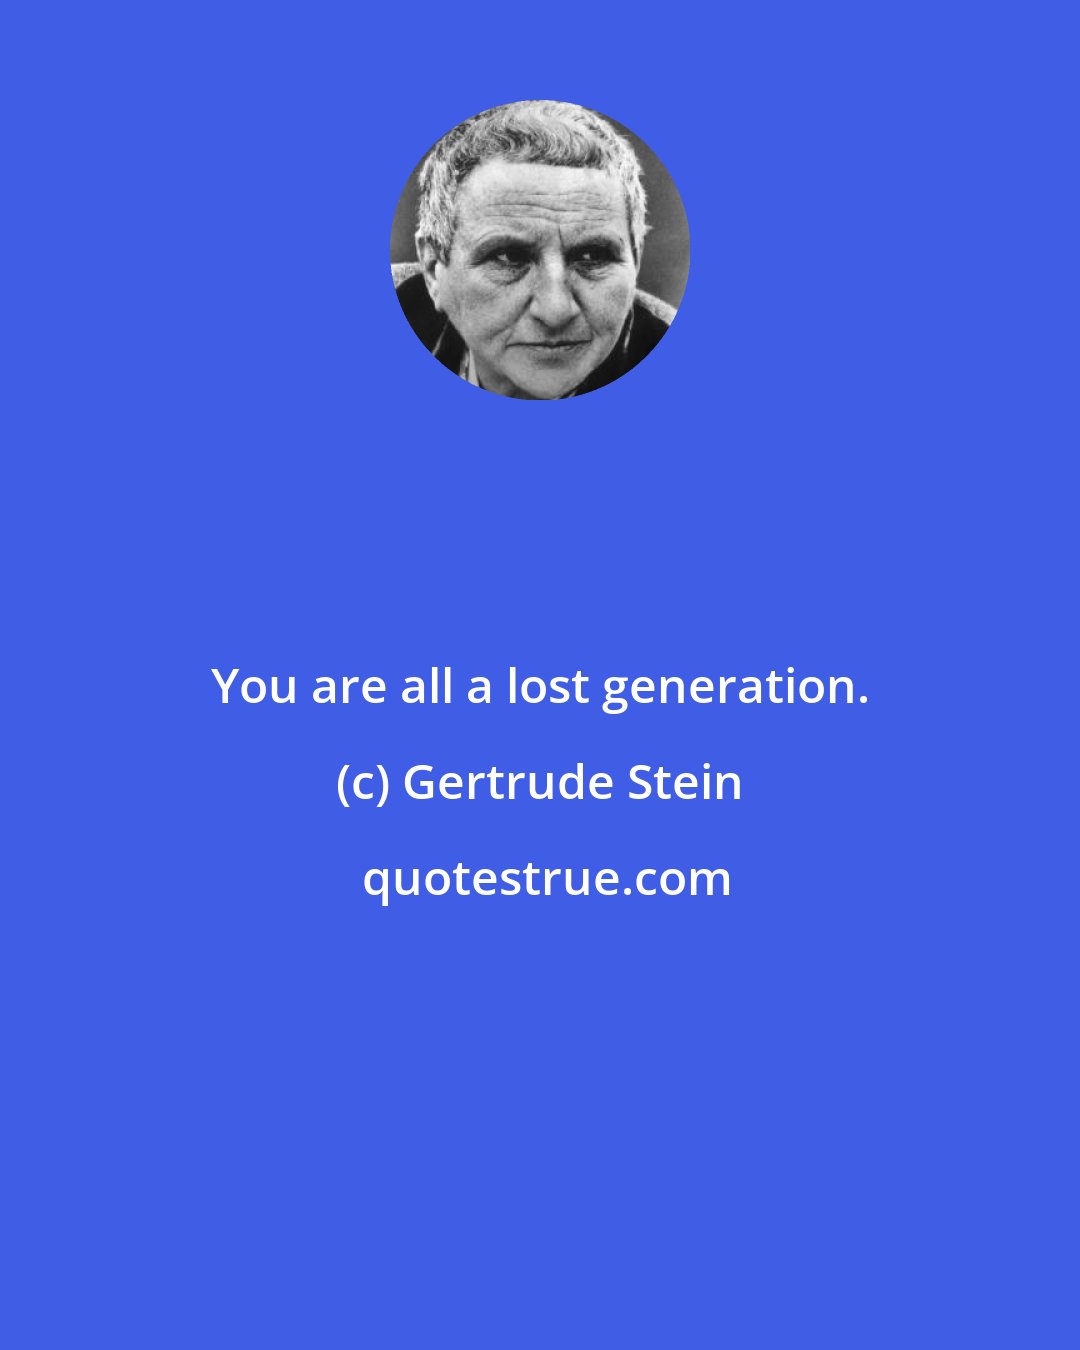 Gertrude Stein: You are all a lost generation.